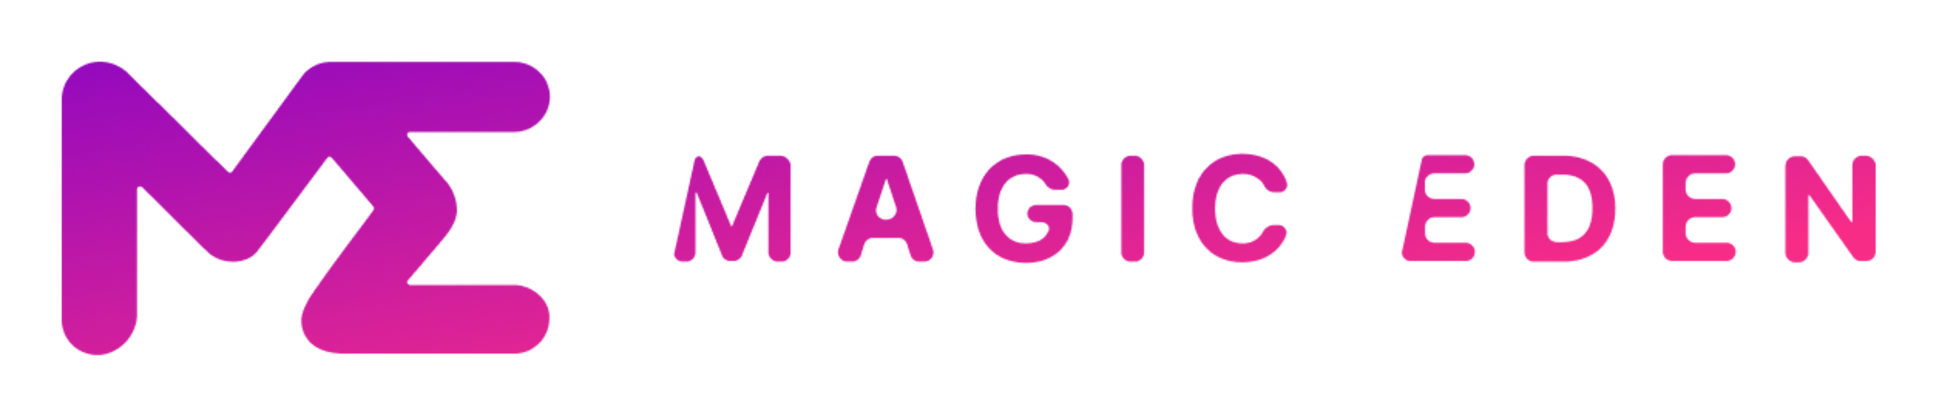 A picture of the Magic Eden logo